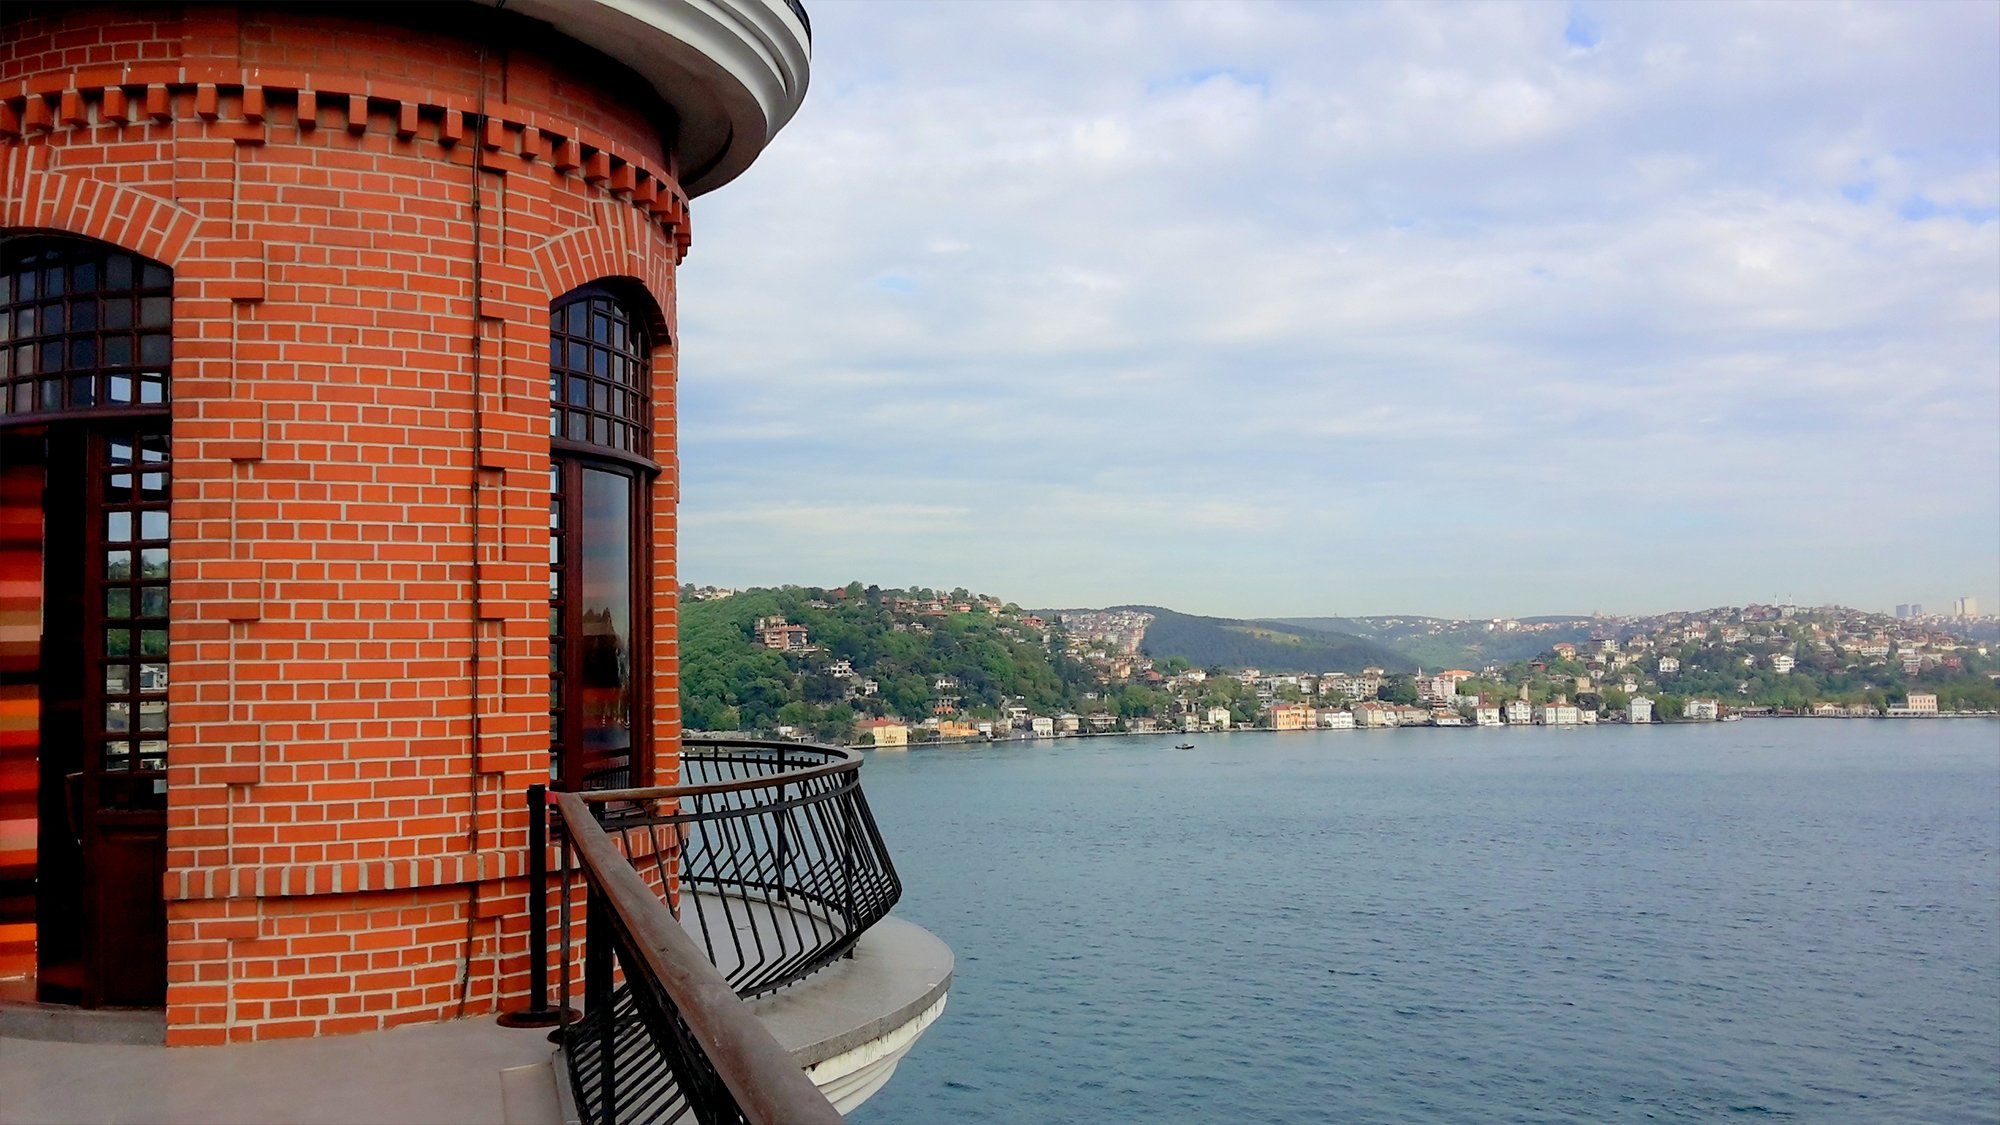 Located within the shell of an early 19th century building, the tower commands a magnificent position on the Bosphorus in Istanbul.